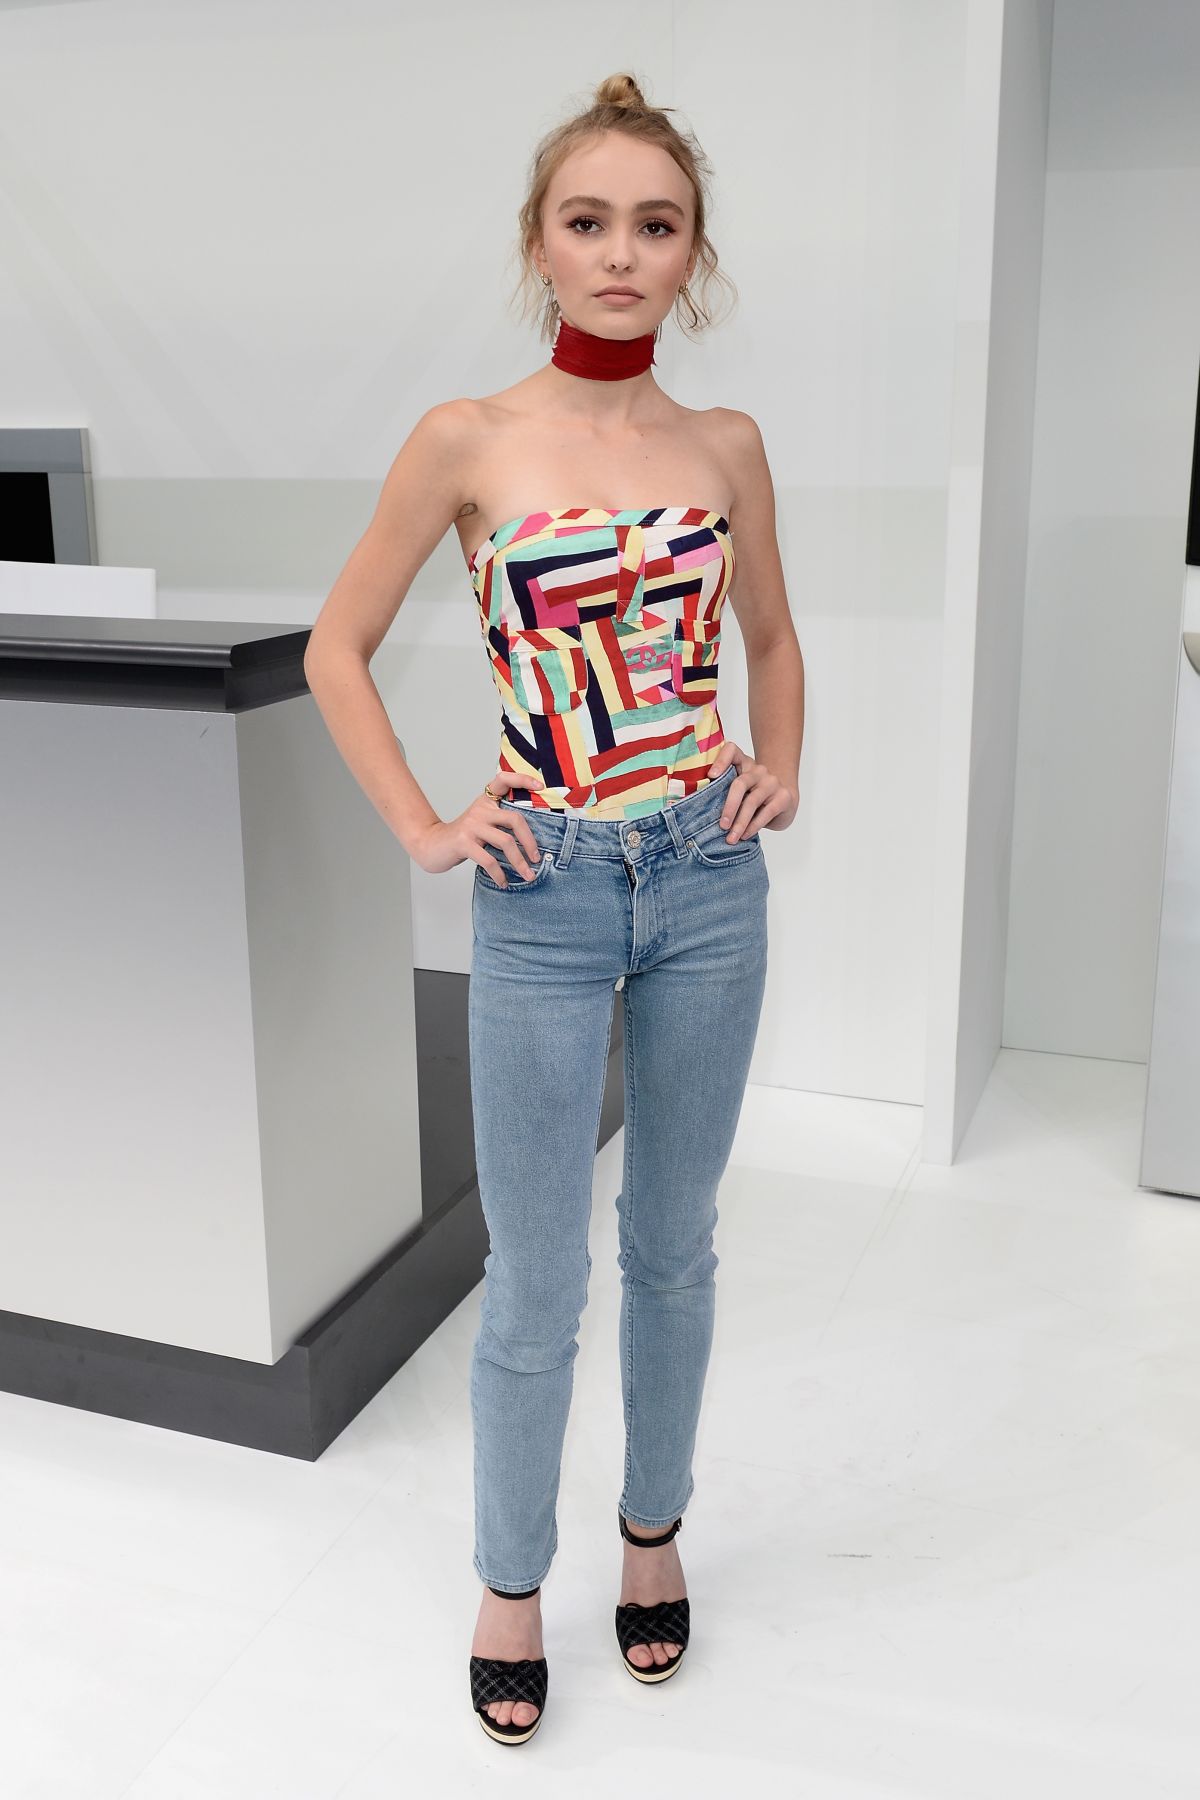 LILY ROSE DEEP at Chanel Fashion Show in Paris 10/06/2015 – HawtCelebs